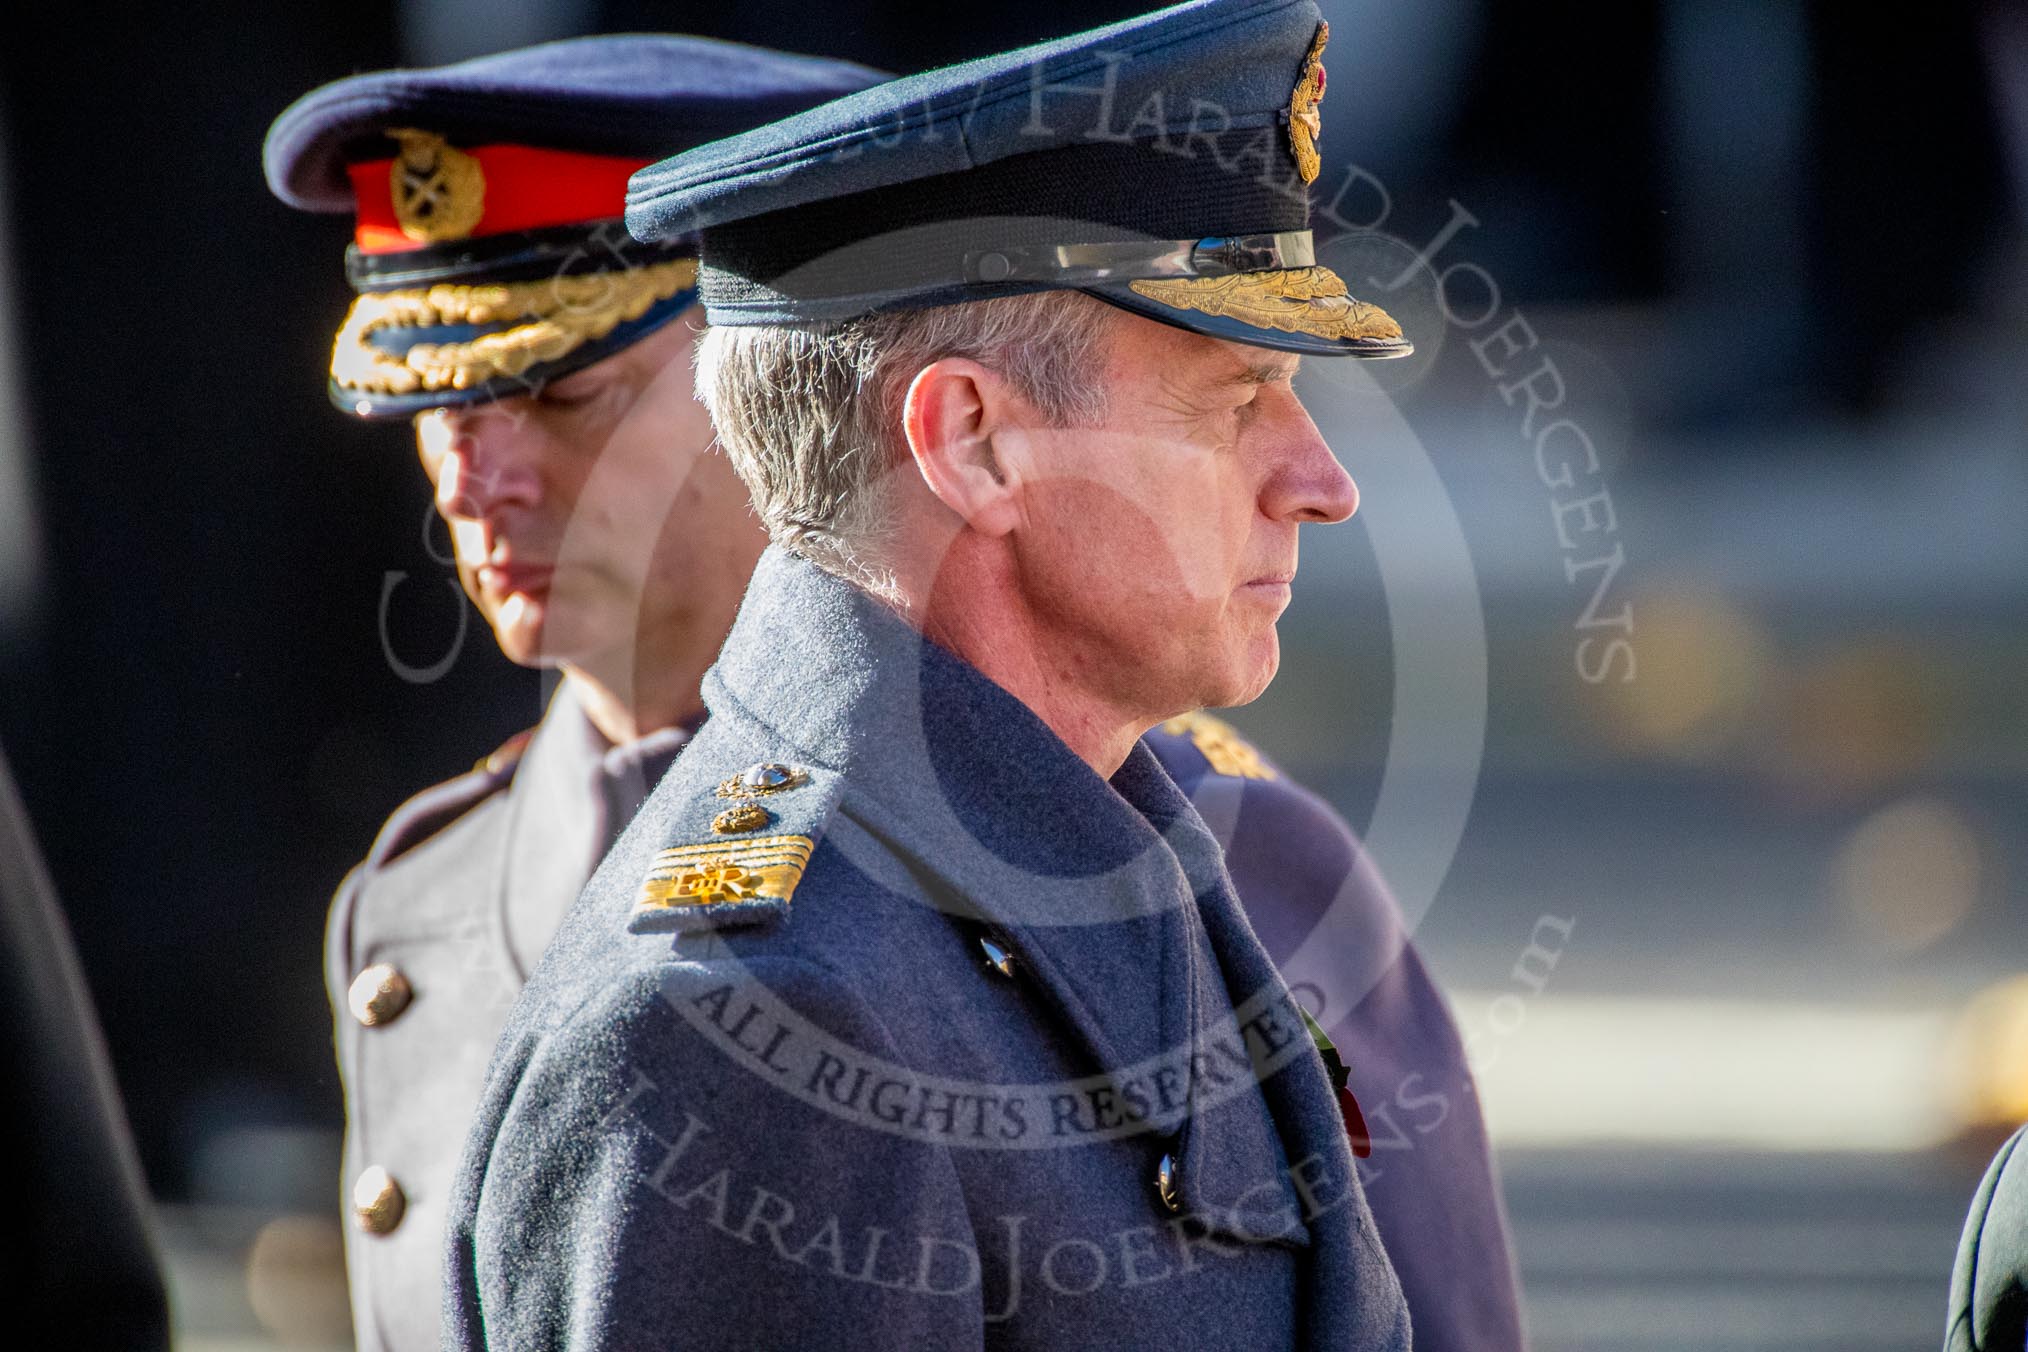 Air Chief Marshal Sir Stephen Hillier KCB CBE DFC ADC, Chief of the Air Staff during the Remembrance Sunday Cenotaph Ceremony 2018 at Horse Guards Parade, Westminster, London, 11 November 2018, 11:16.